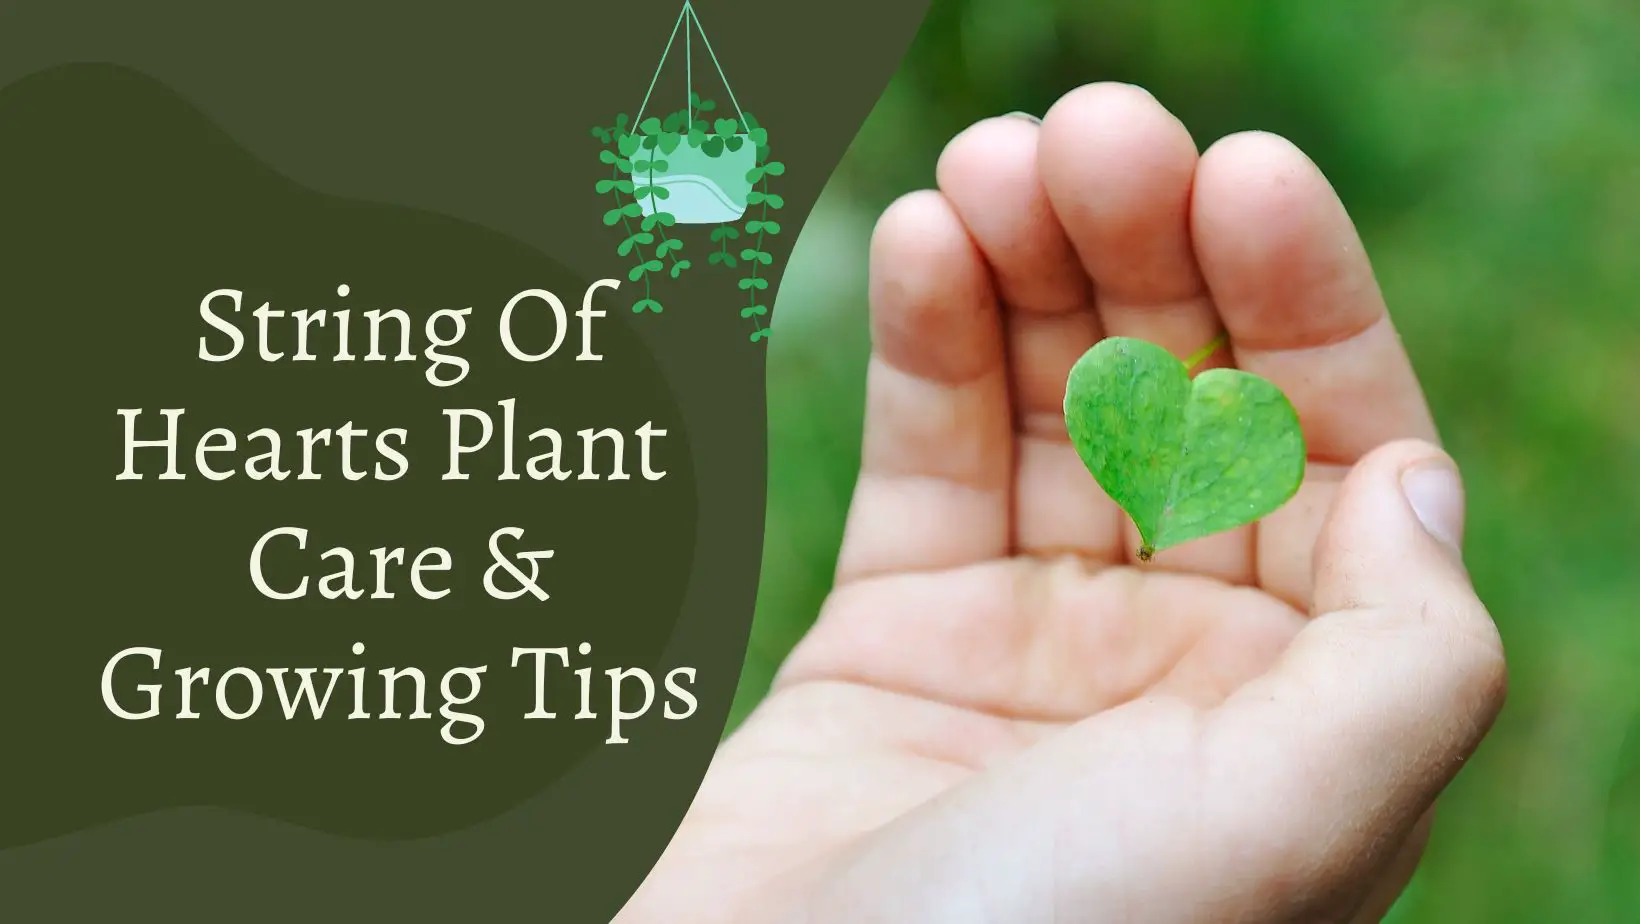 String Of Hearts Plant – Complete Care & Growing Tips